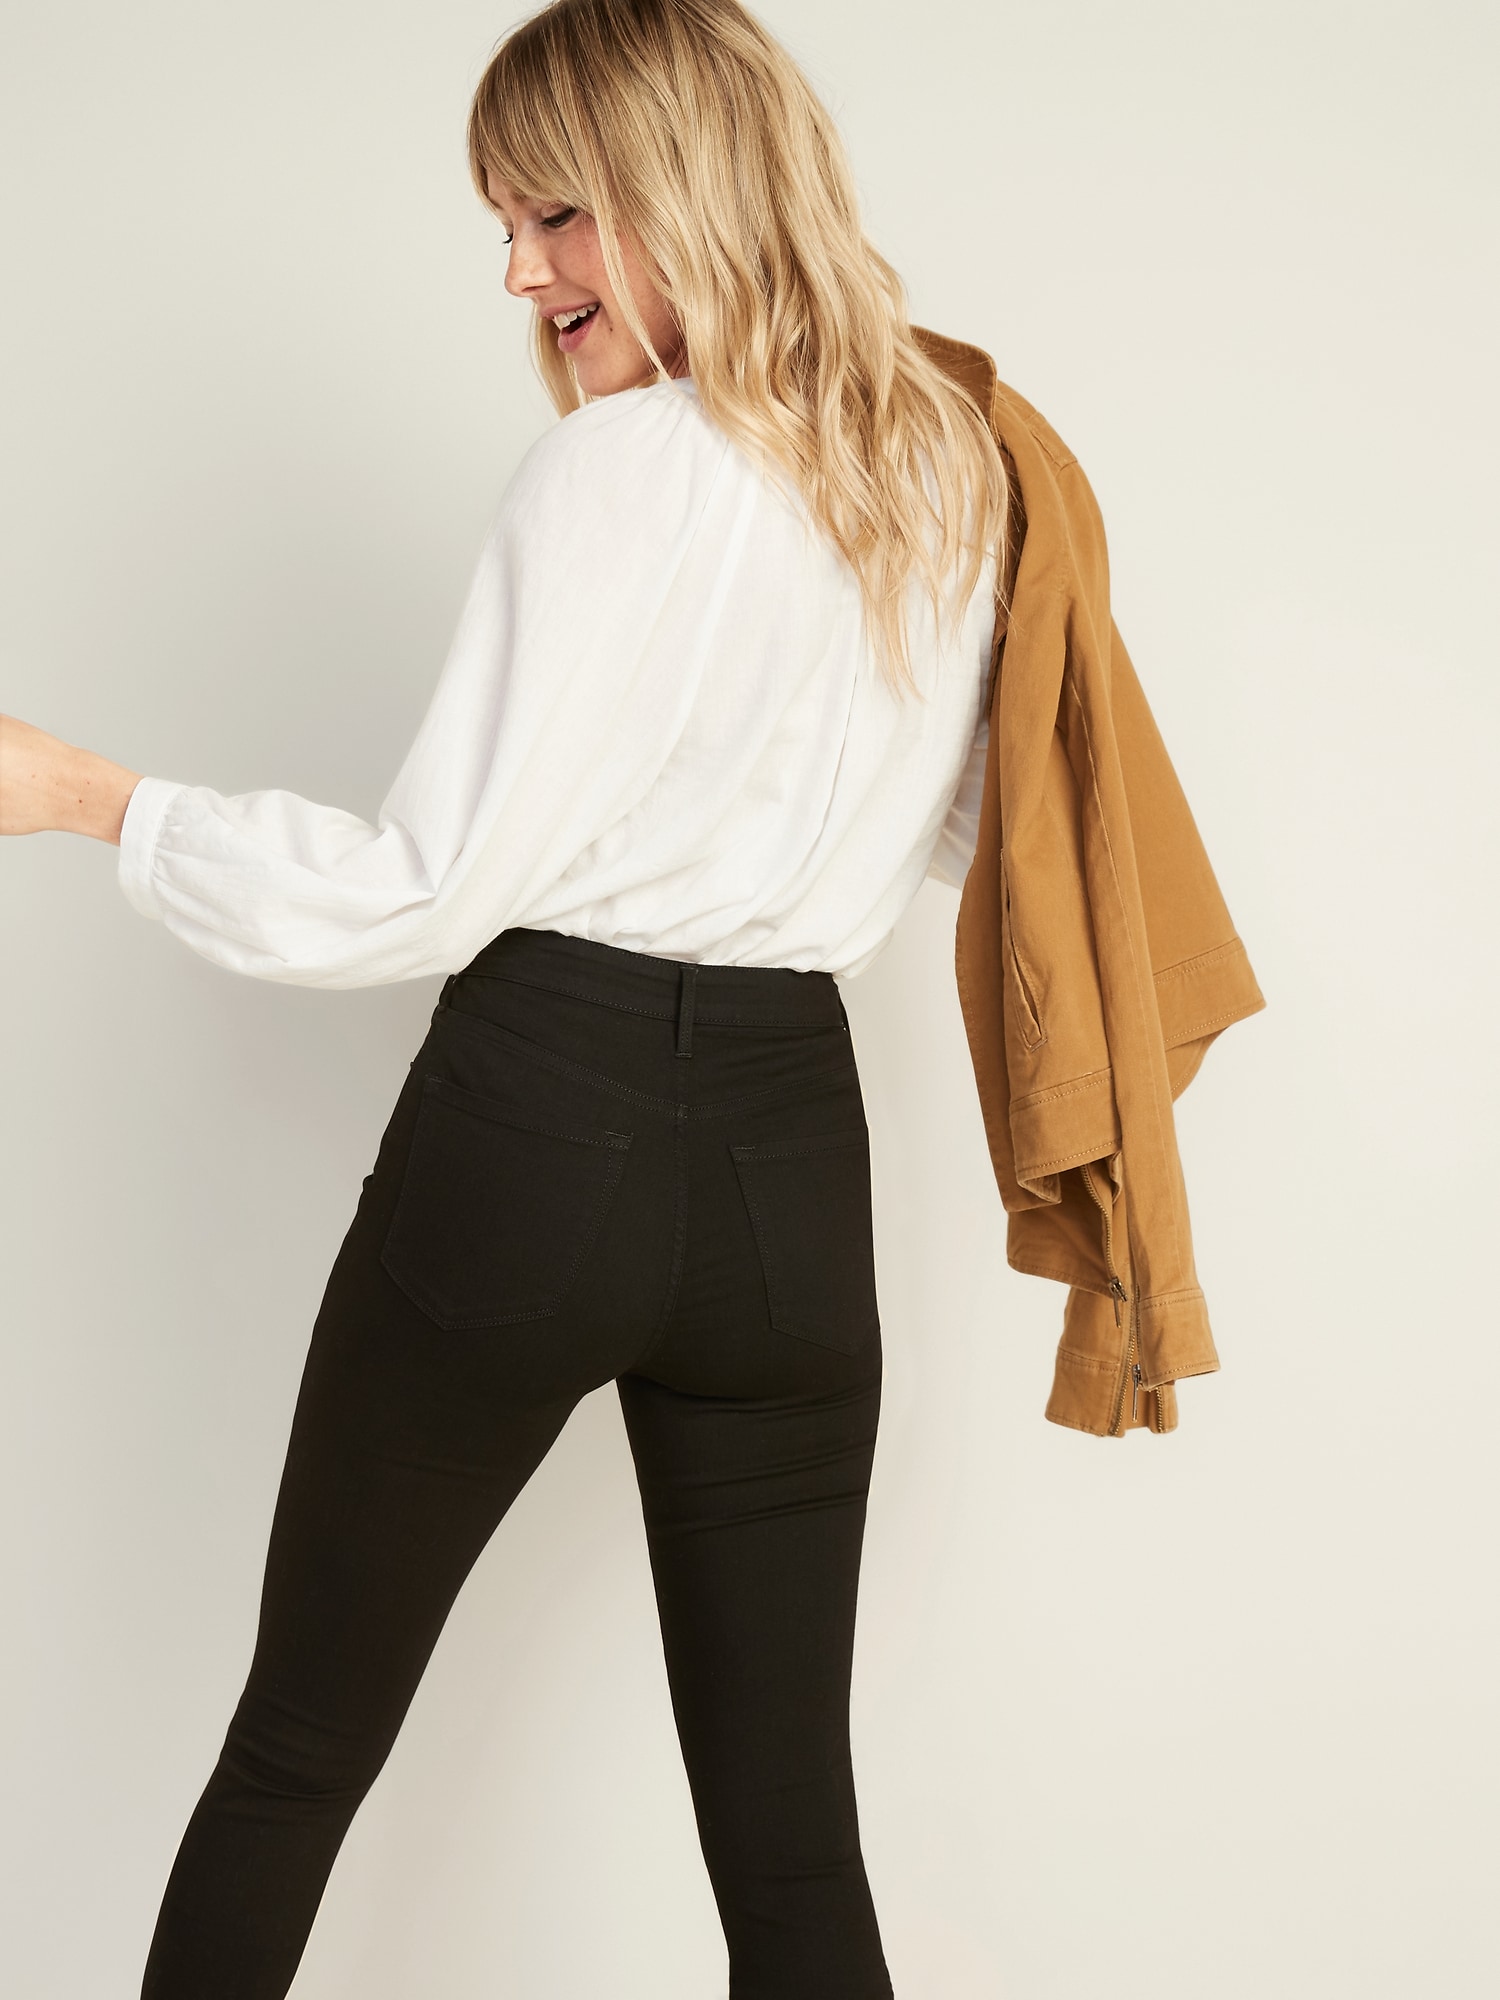 old navy high rise black jeans